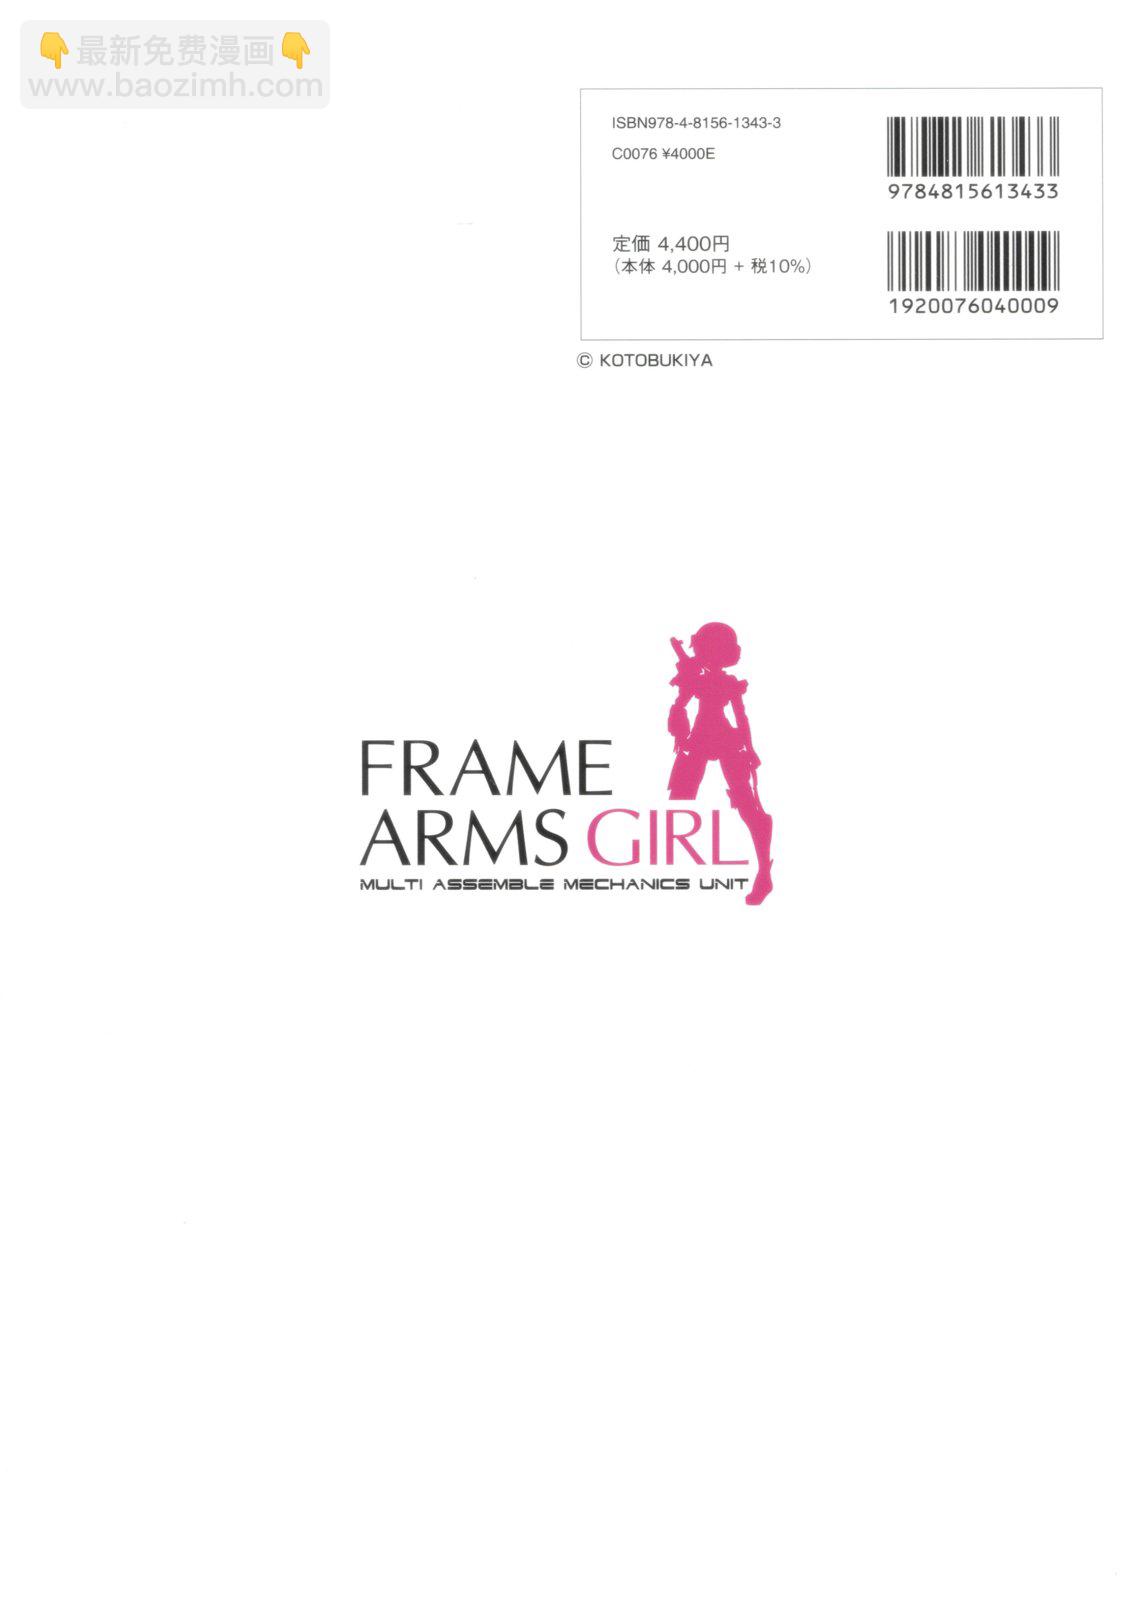 FRAME ARMS GIRL DESIGNERS NOTE - 全一卷(1/5) - 4